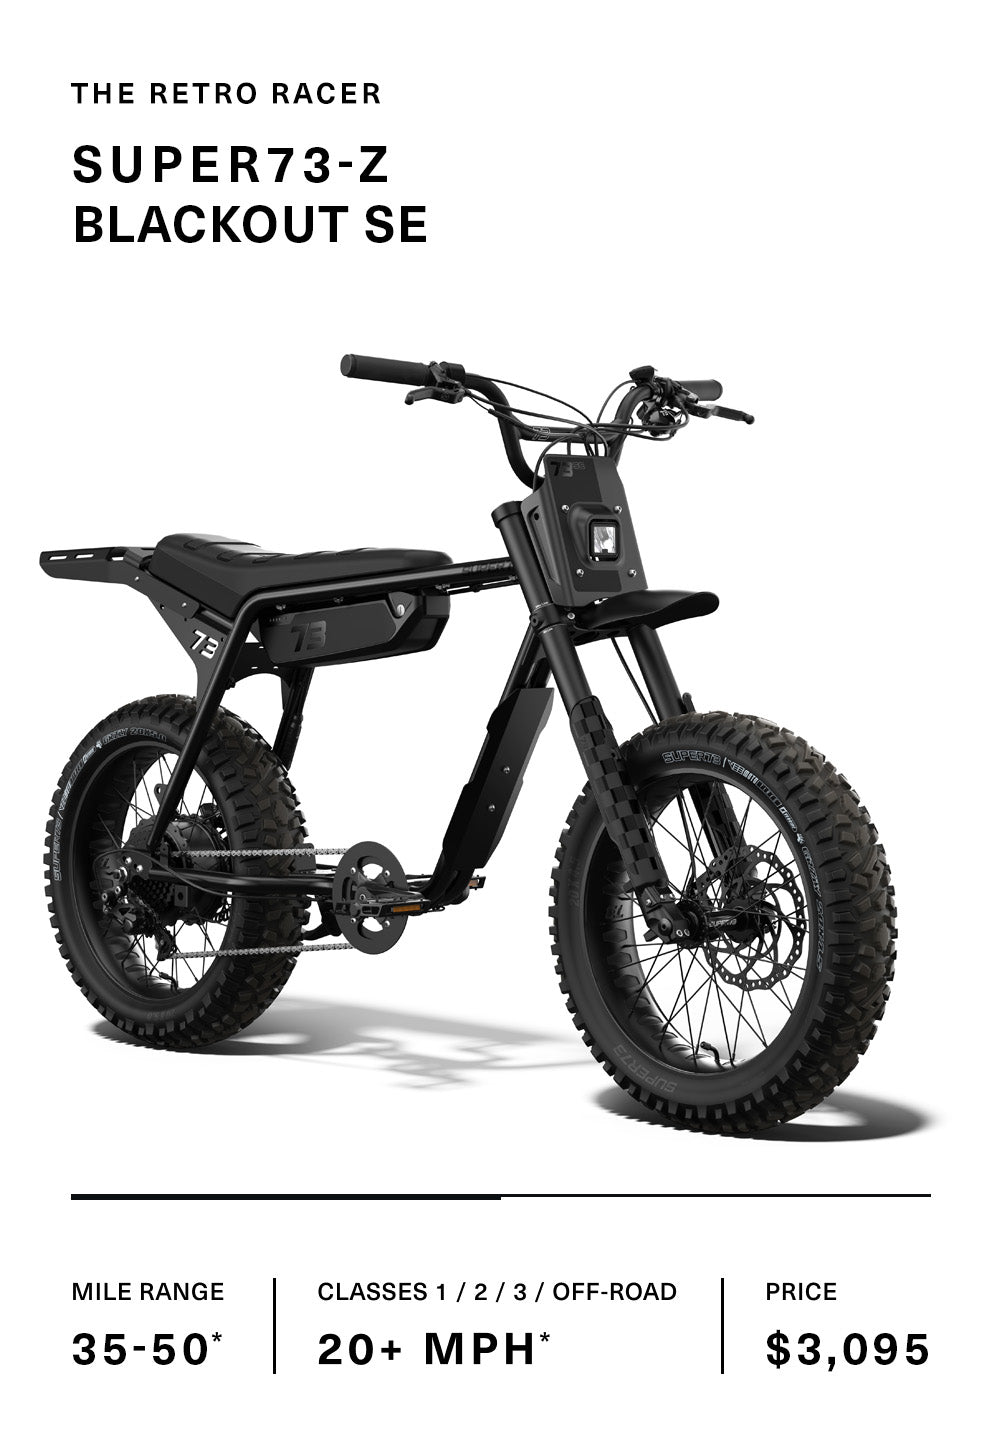 Image of the SUPER73-Z Blackout SE bike with specs.